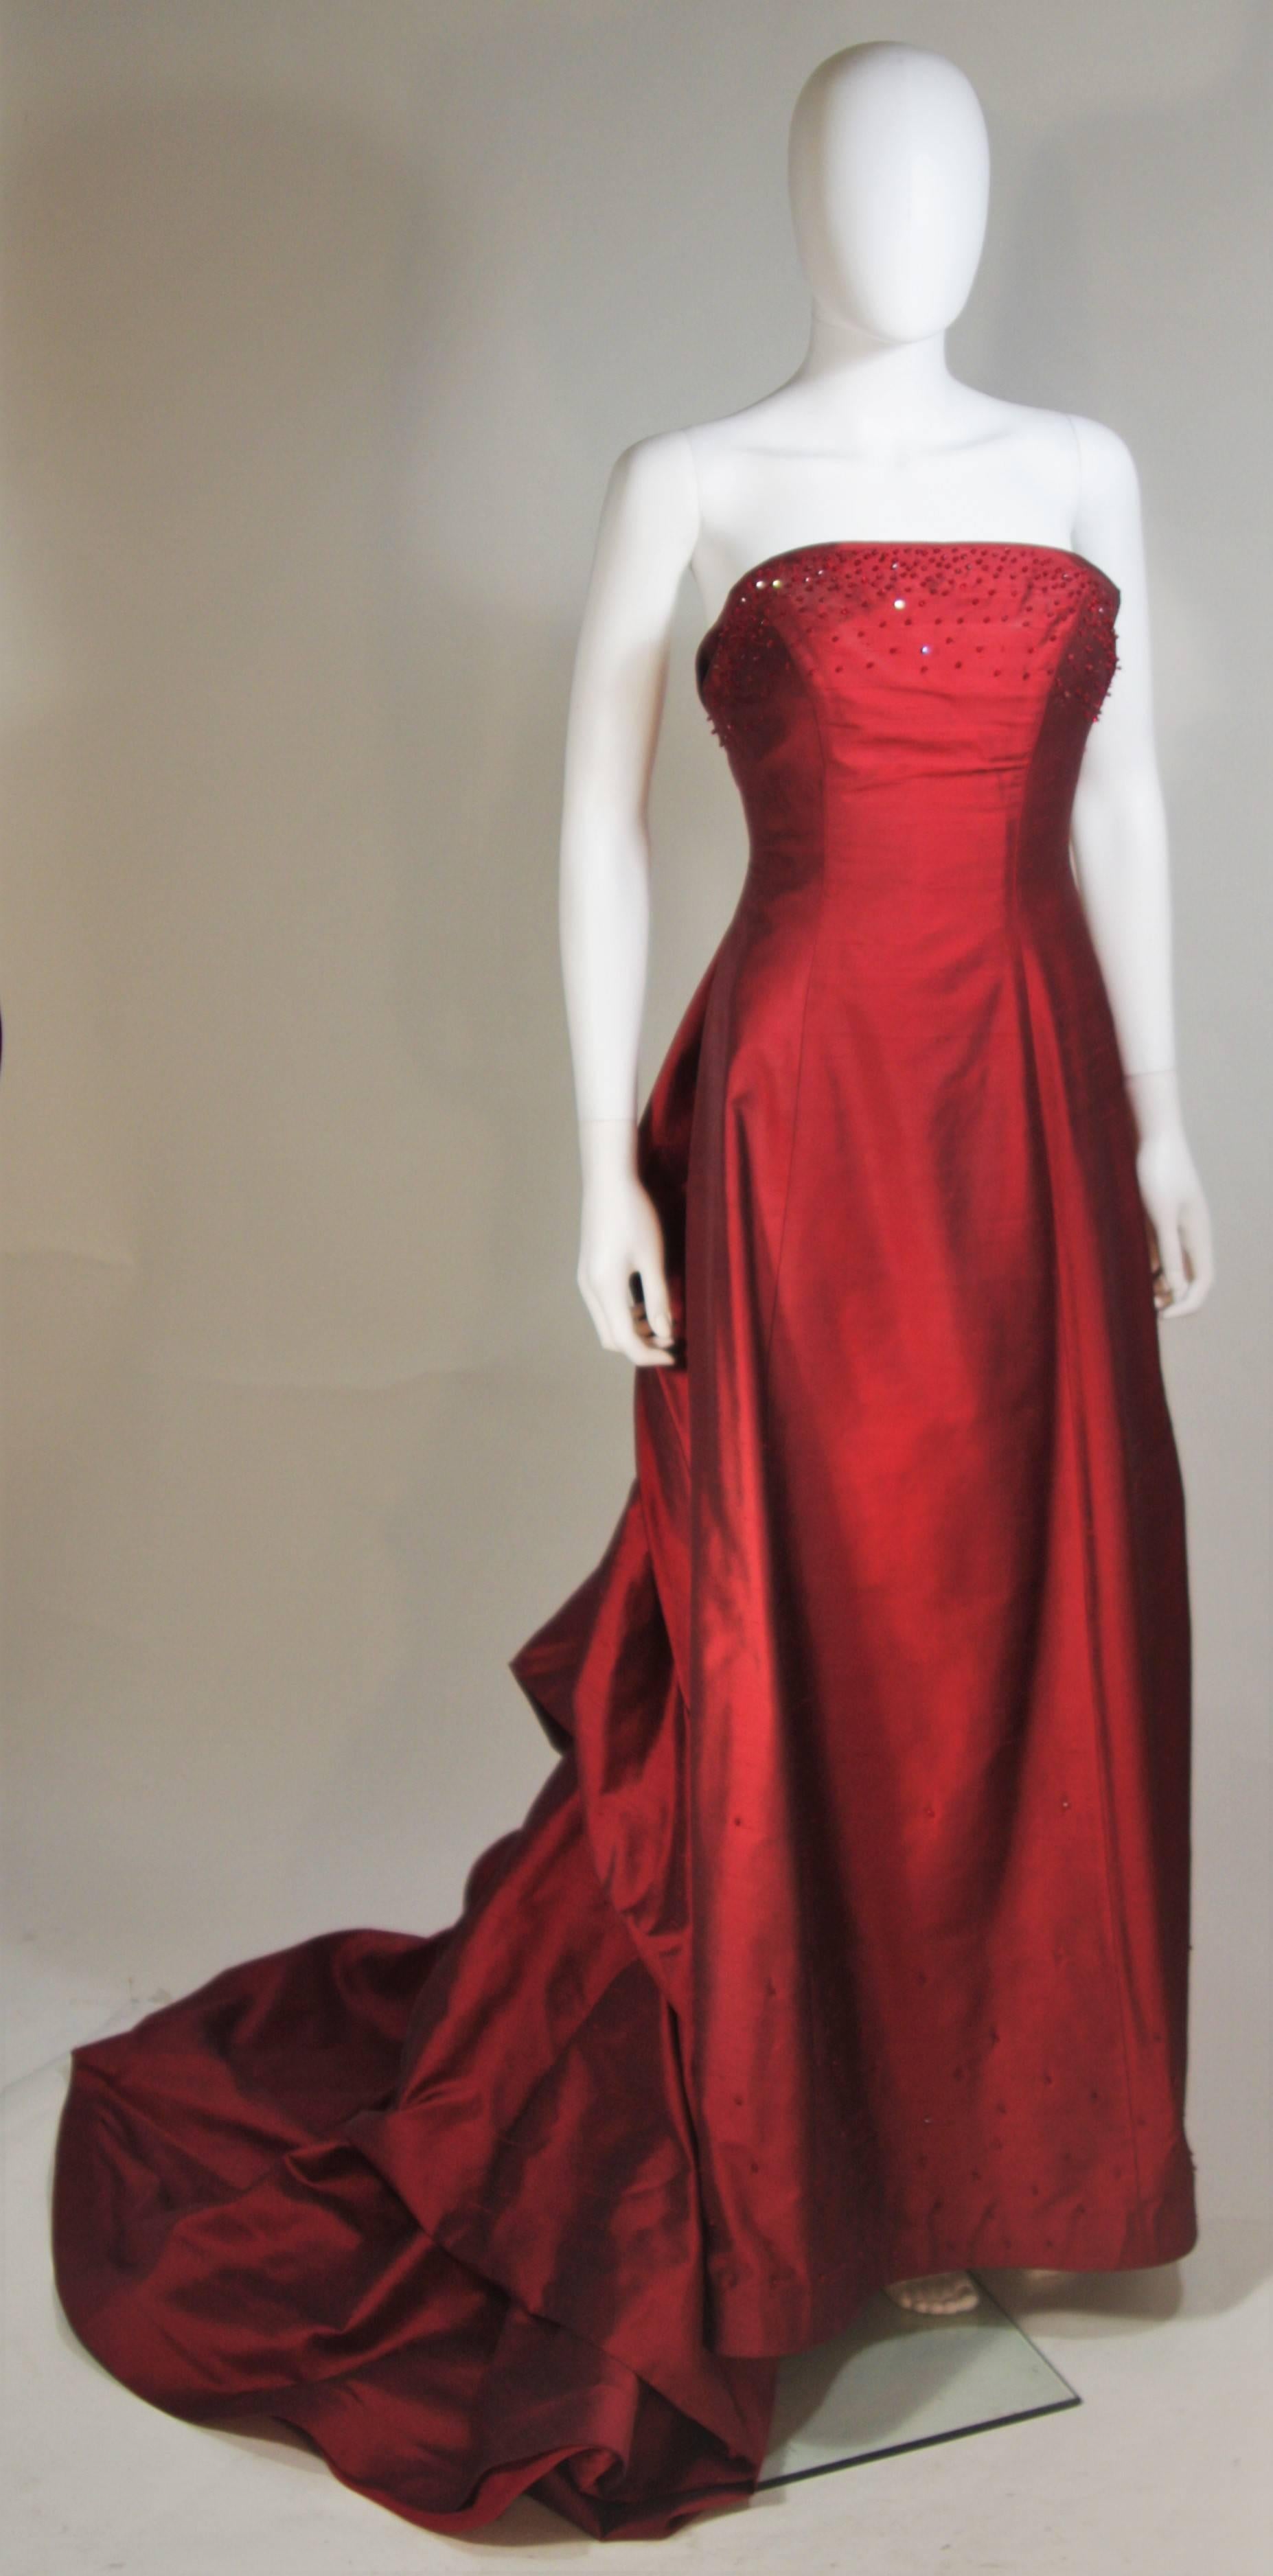  This Daniel James Cantu COUTURE gown is composed of a burgundy raw silk chiffon with bead applique and flower at the center back. There is a center back zipper closure and train. In great condition. 

  **Please cross-reference measurements for